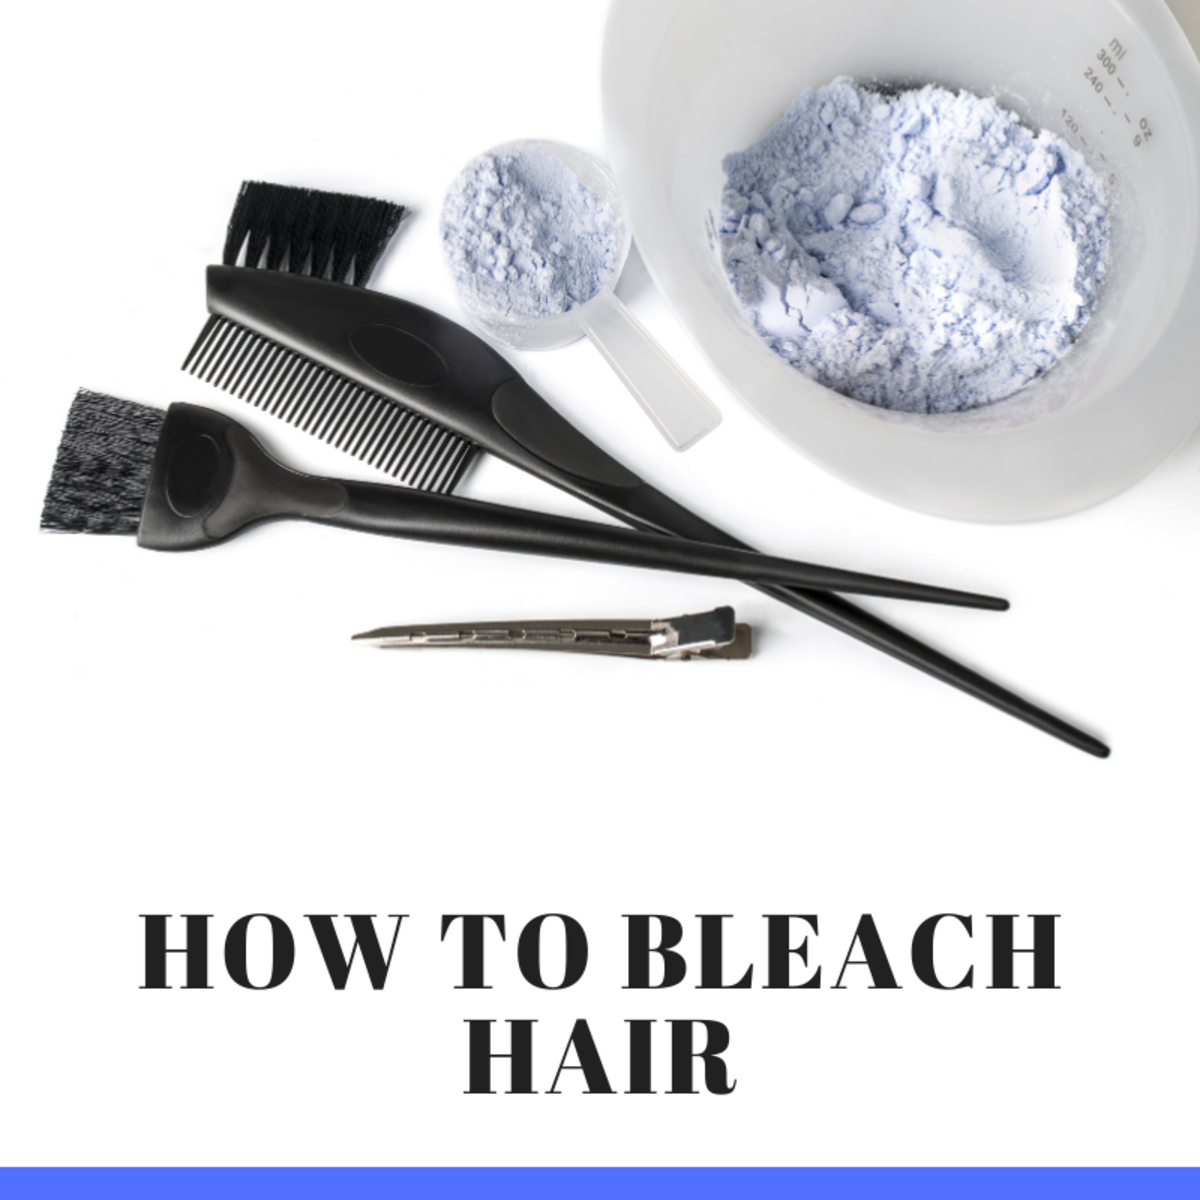 The DIY hair bleaching guide for achieving optimal results at home. Read on to discover everything you need to know!